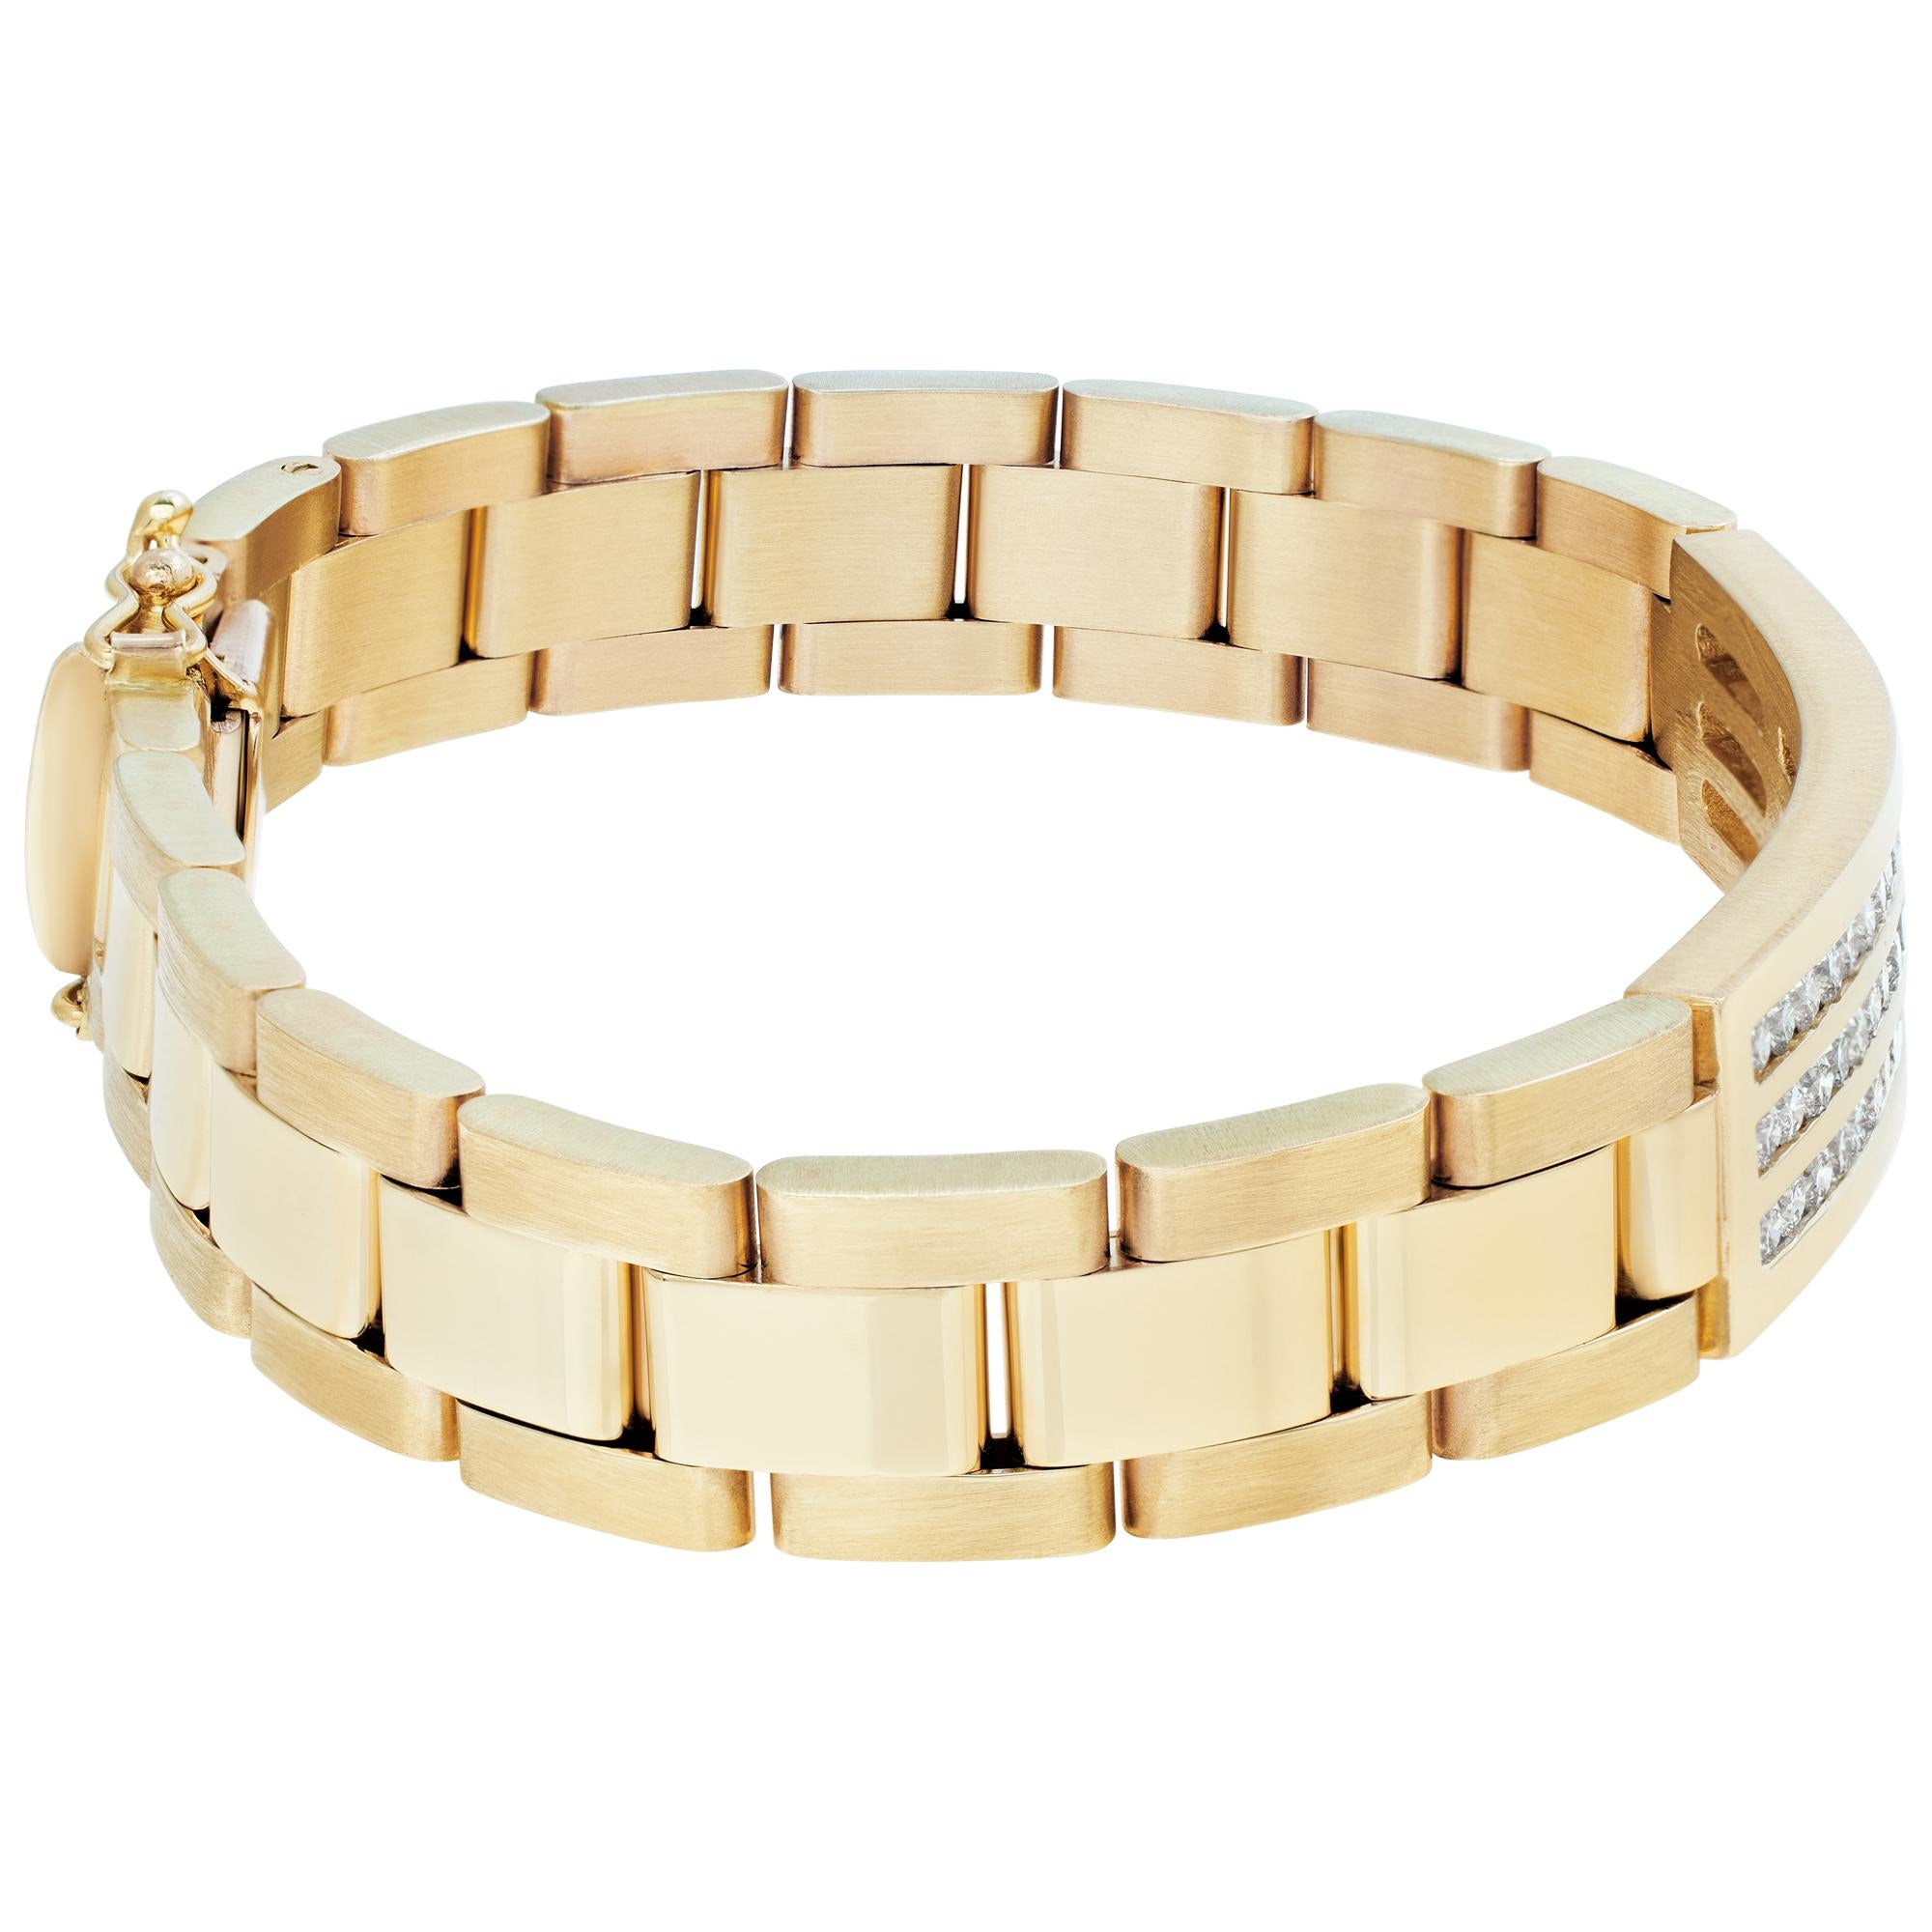 Mens Oyster link style diamond bracelet in 14k yellow gold. Approximately 2.55 carats in round channel set diamonds (H-I color, SI clarity). 8 inch length. 0.5 inch width.
